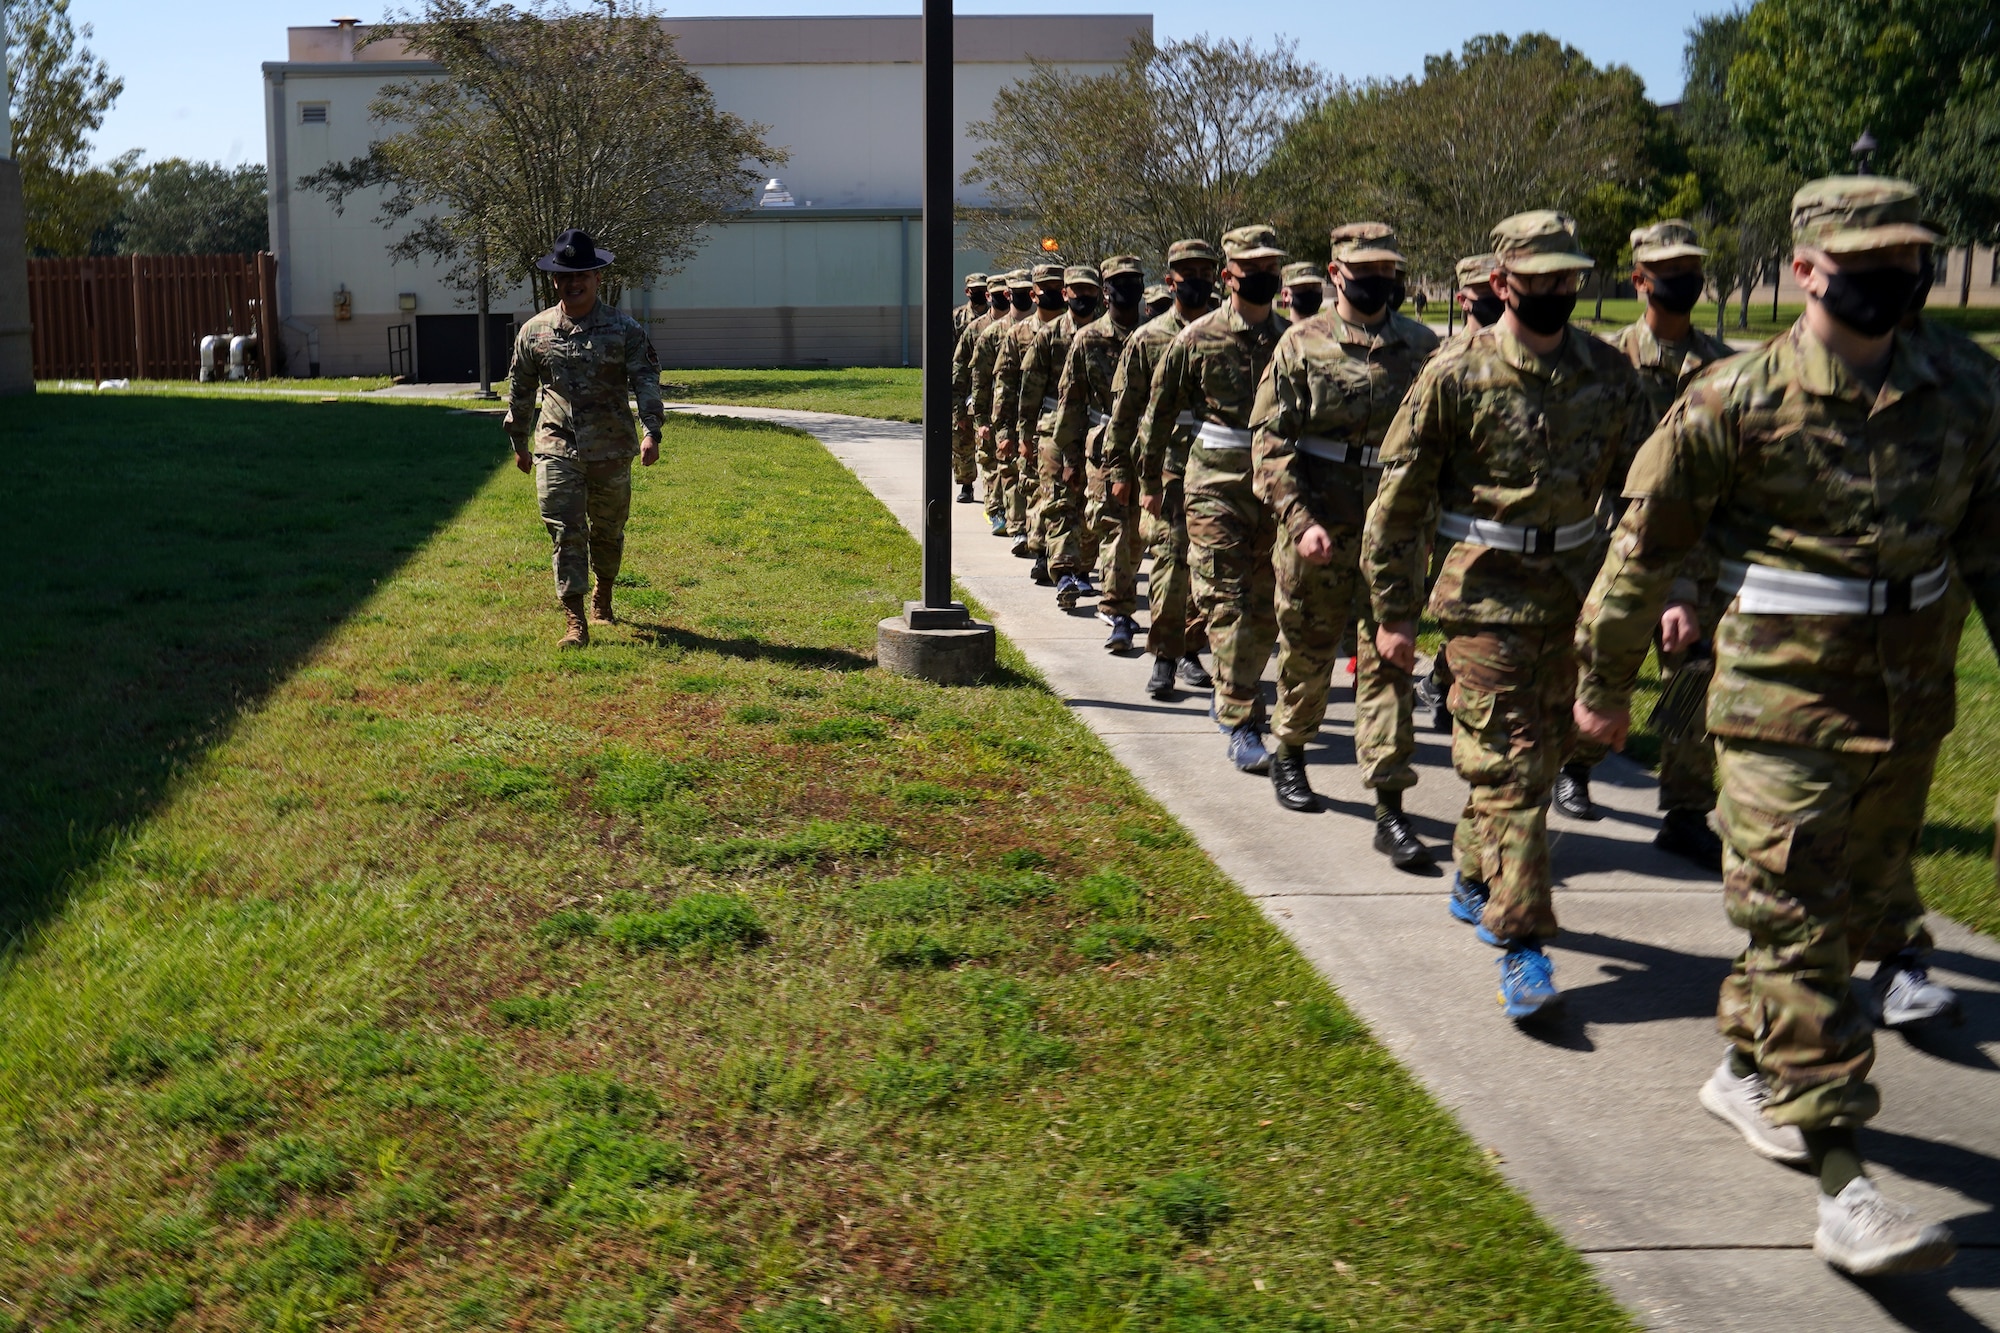 U.S. Air Force Tech. Sgt. Marcos Garcia, 37th Training Wing Detachment 5 military training instructor, marches basic military training trainees outside Erwin Manor at Keesler Air Force Base, Mississippi, Oct. 1, 2020. Garcia showcases the need for diversity by encouraging those he supervises to embrace the cultures of others in the military to help make a stronger Air Force. (U.S. Air Force photo bus Airman 1st Class Seth Haddix)